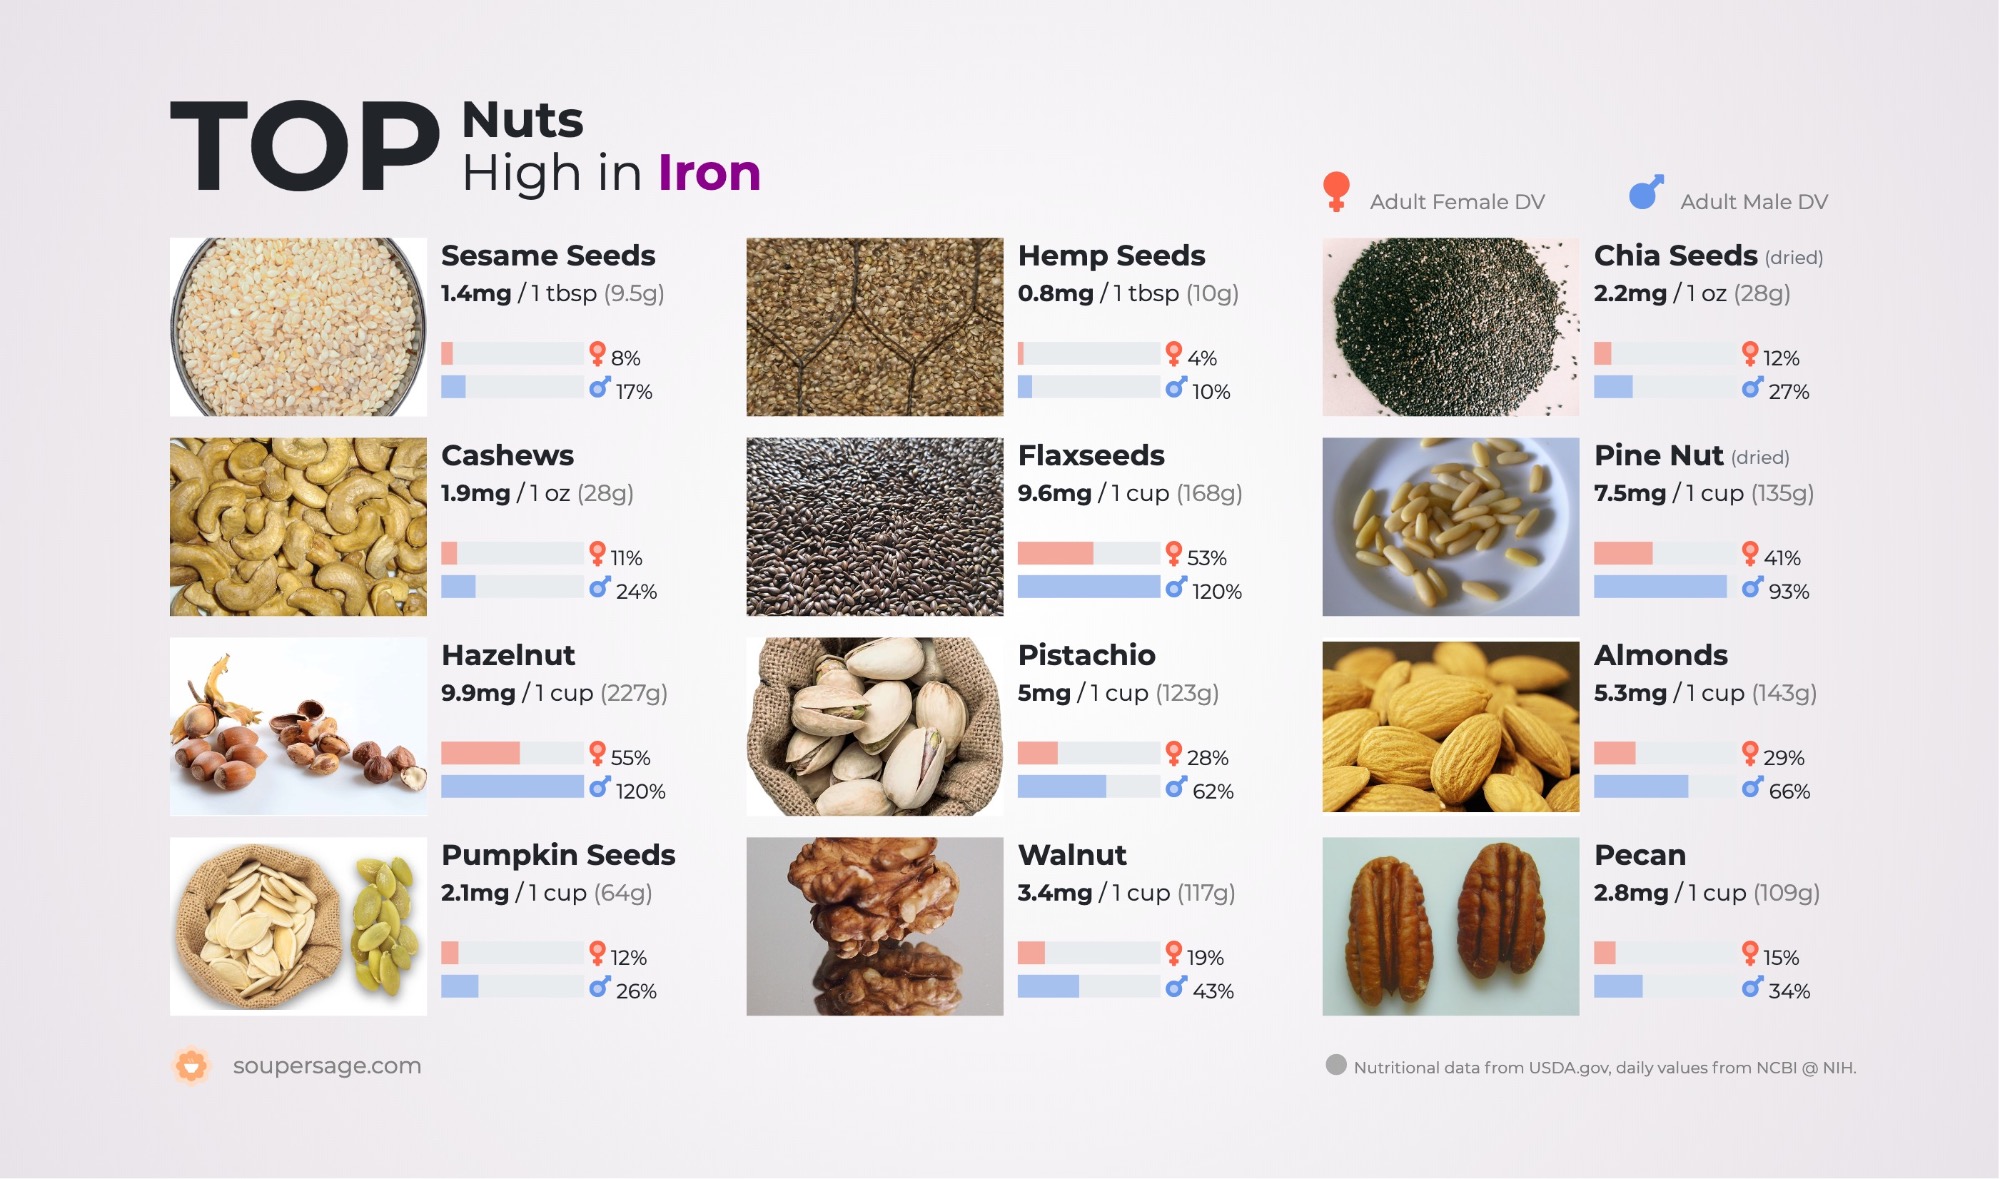 image of Top Nuts High in Iron